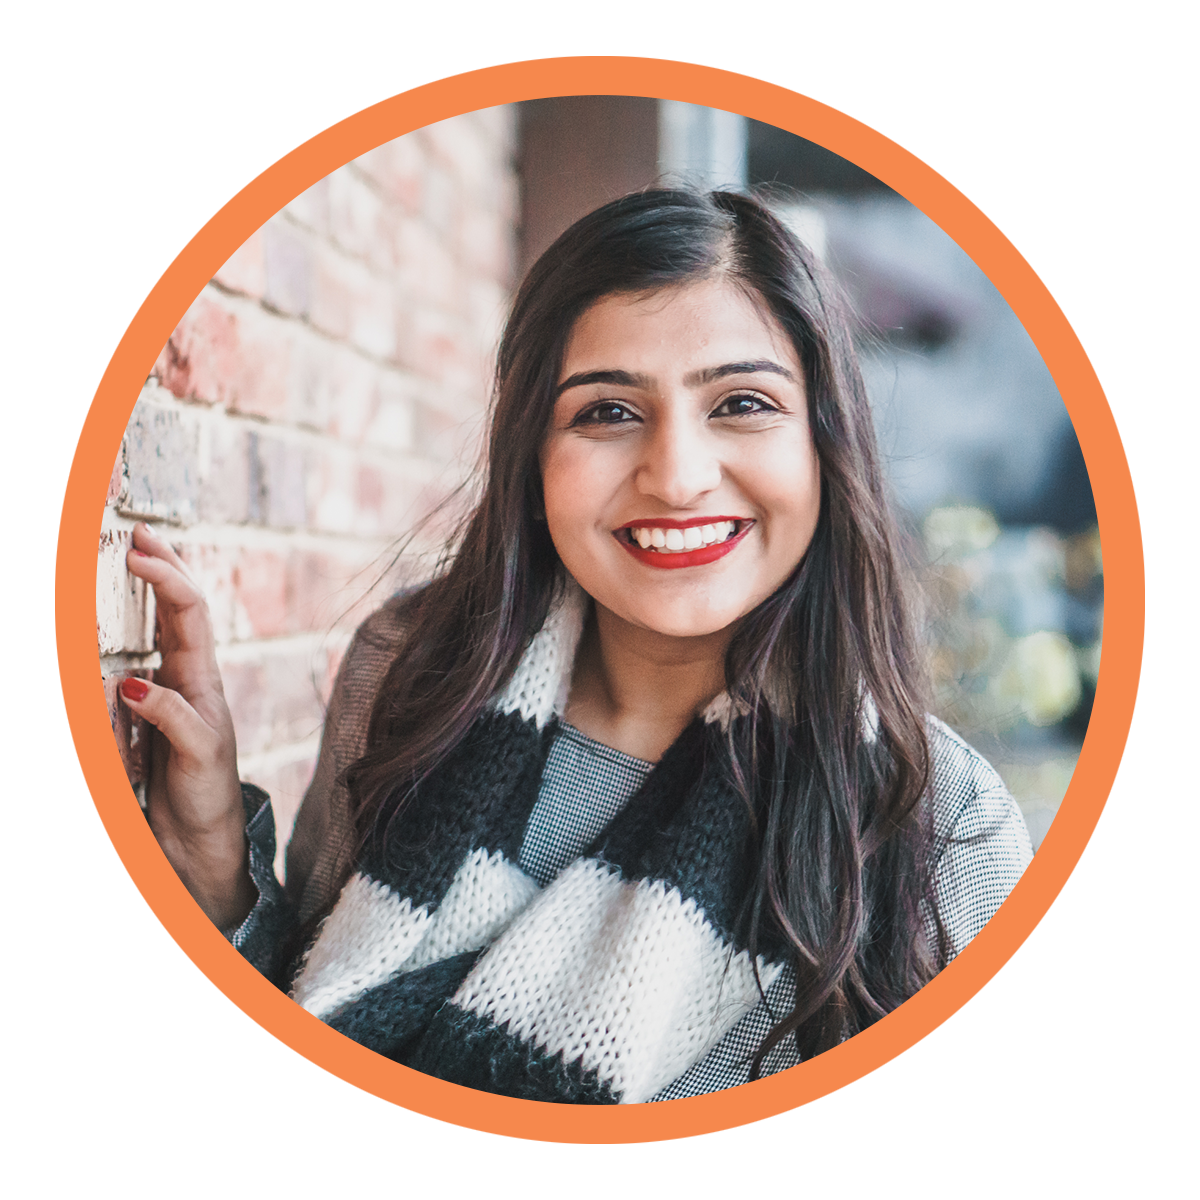  Neha is a graduate of the University of North Texas and was born and raised in Fort Worth, Texas. She enjoys hiking, painting, and reading and spends her time volunteering at various organizations in the Dallas-Fort Worth area to connect and learn m